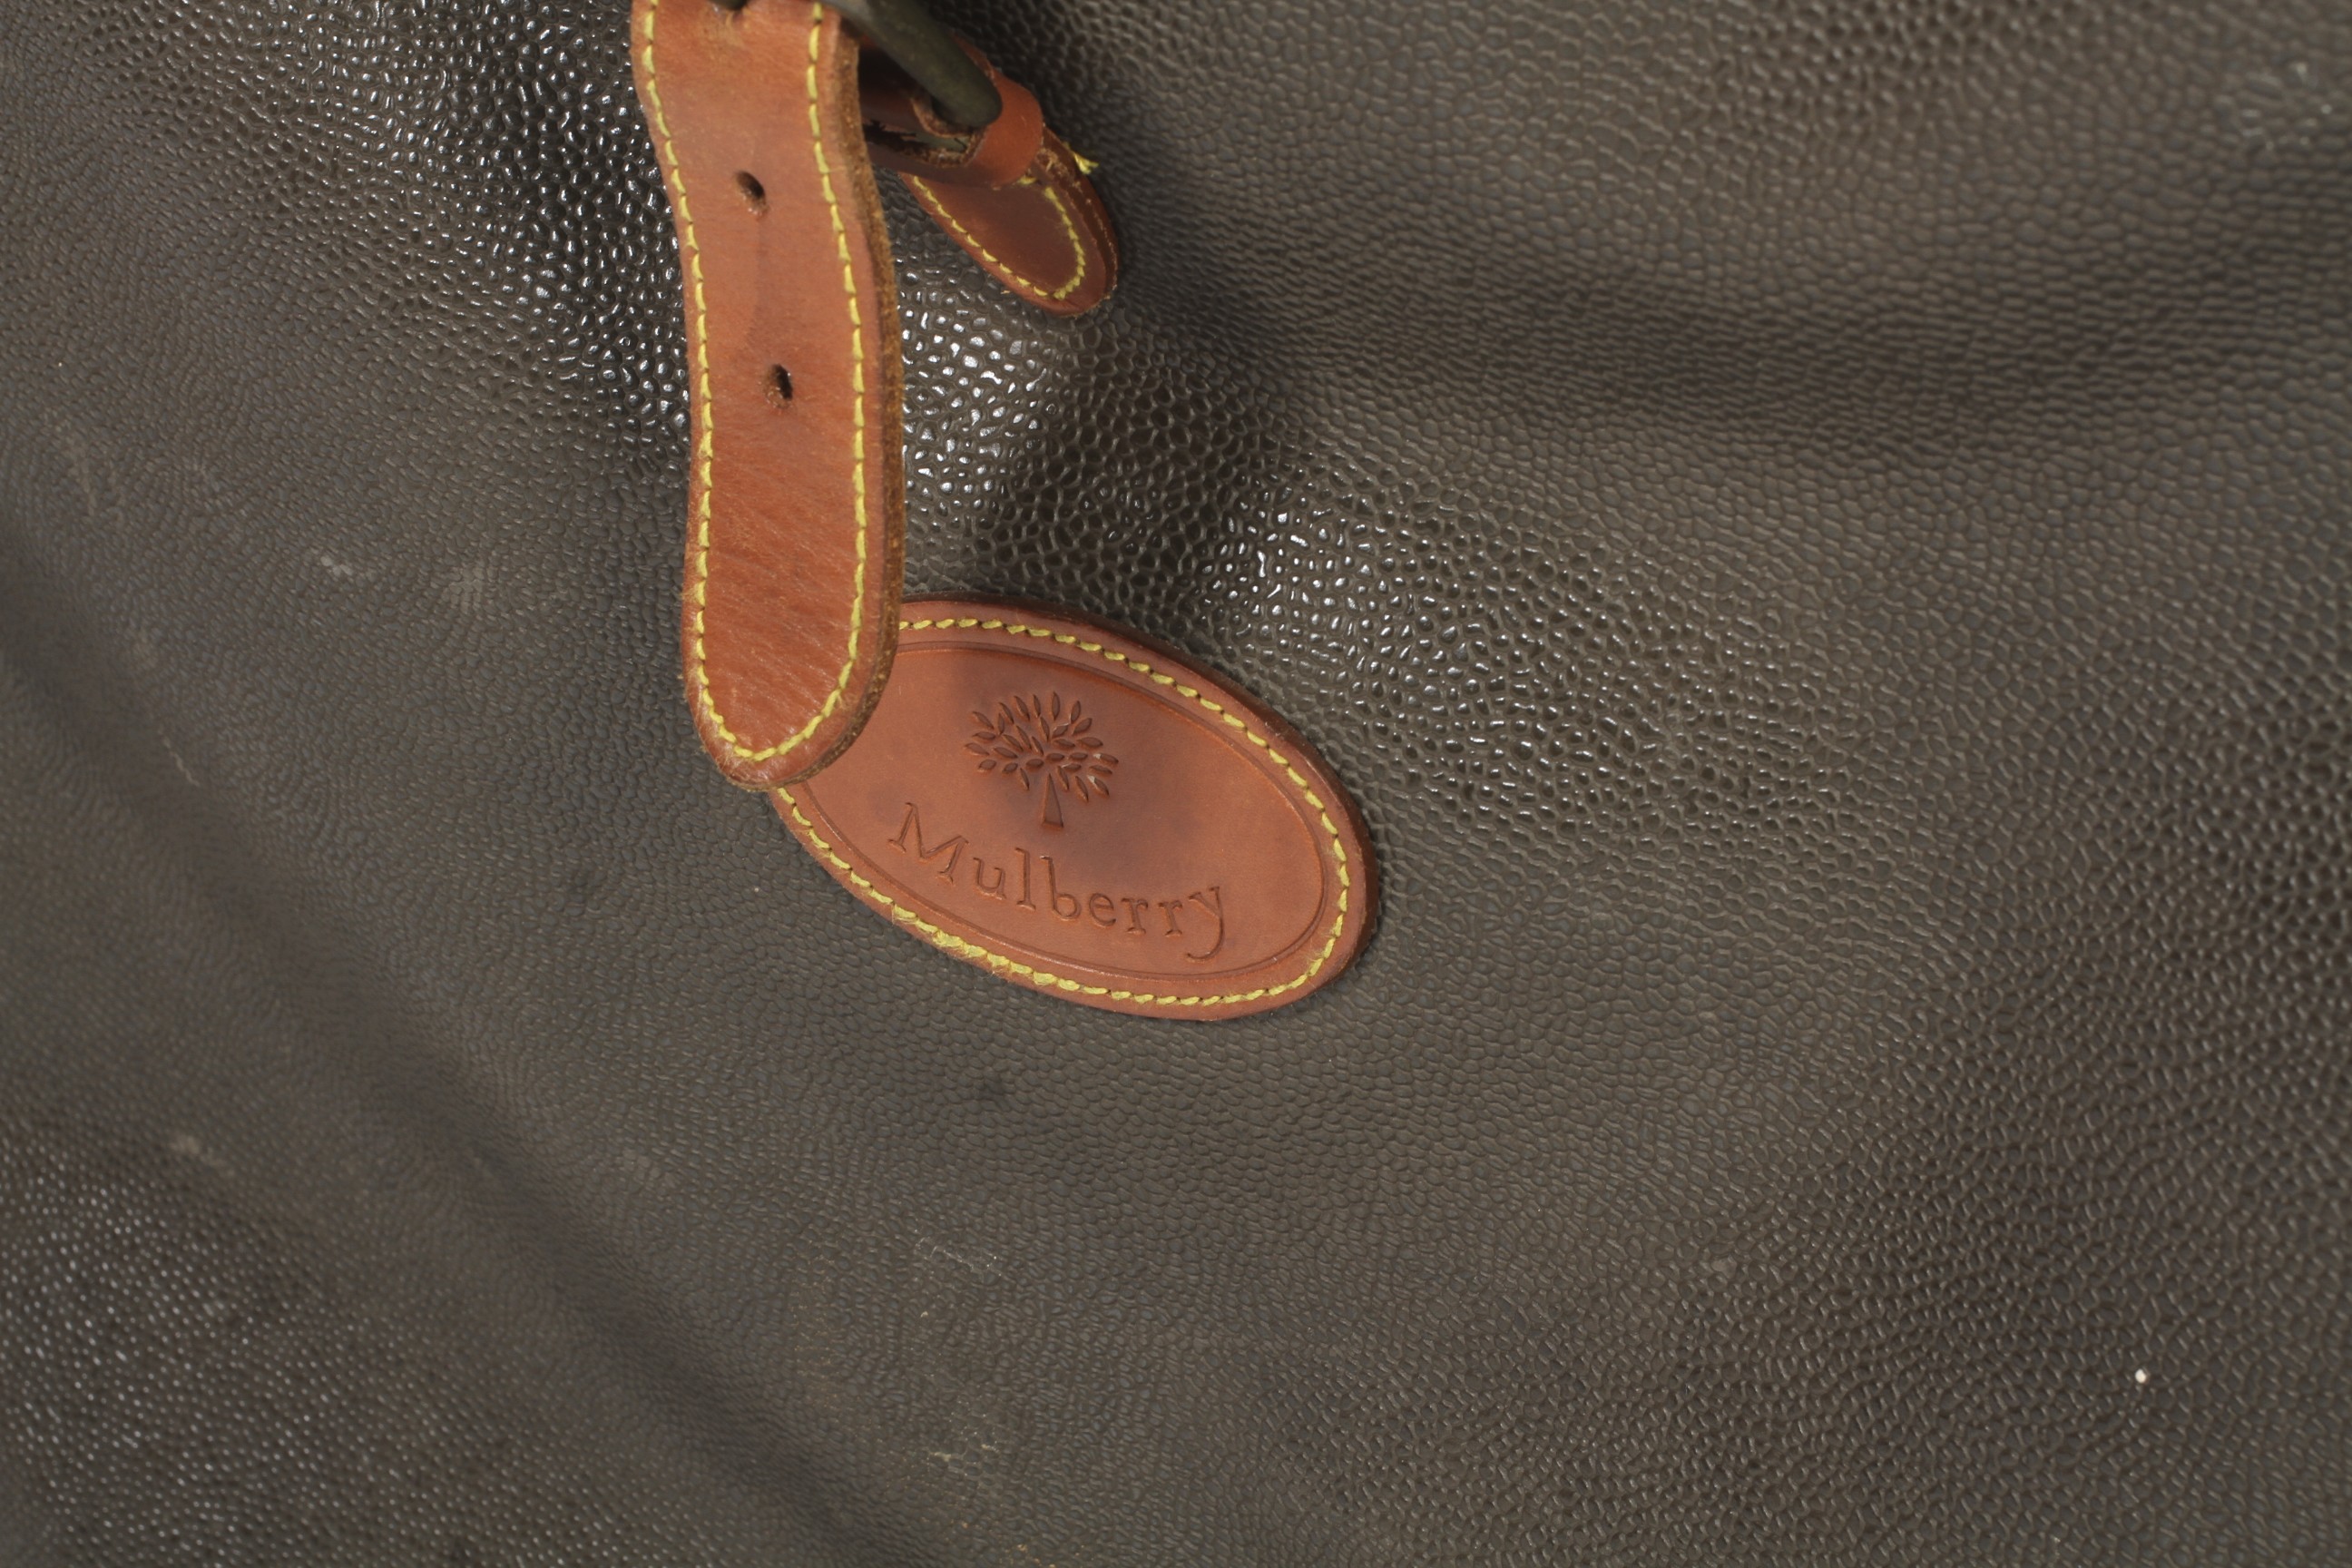 A Mulberry soft sided suitcase. - Image 2 of 2